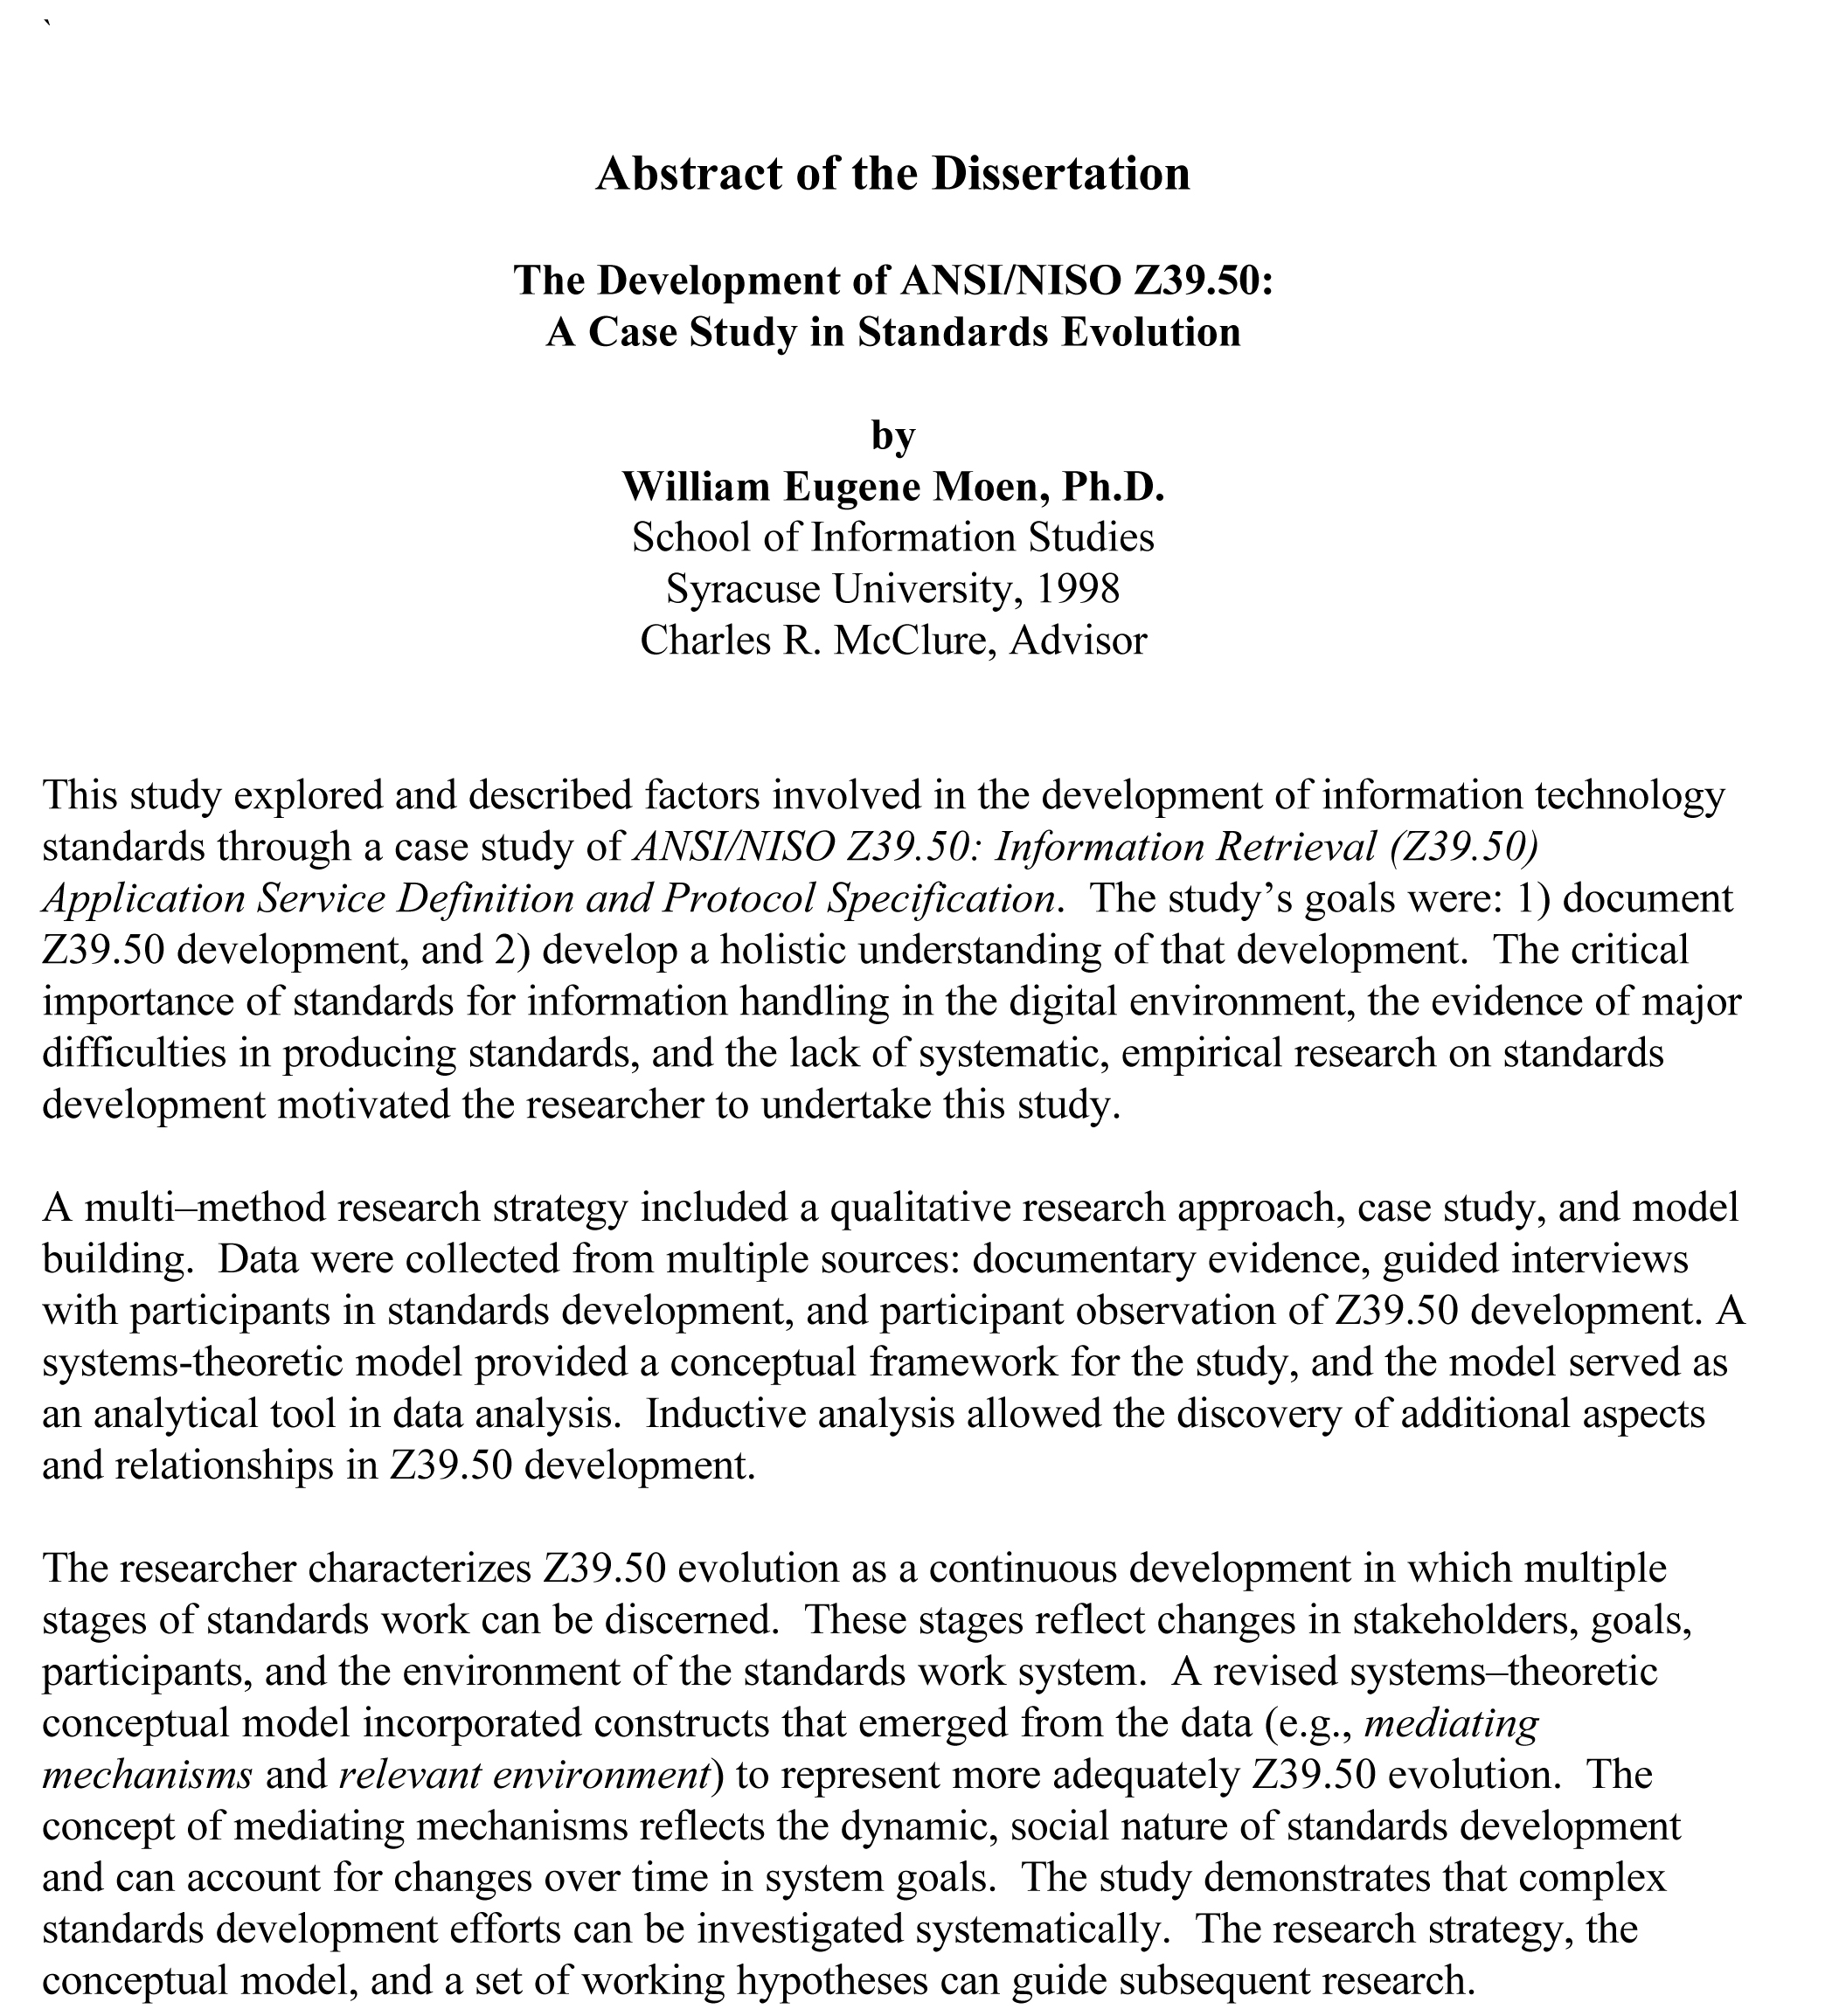 Archive of dissertation abstracts in music